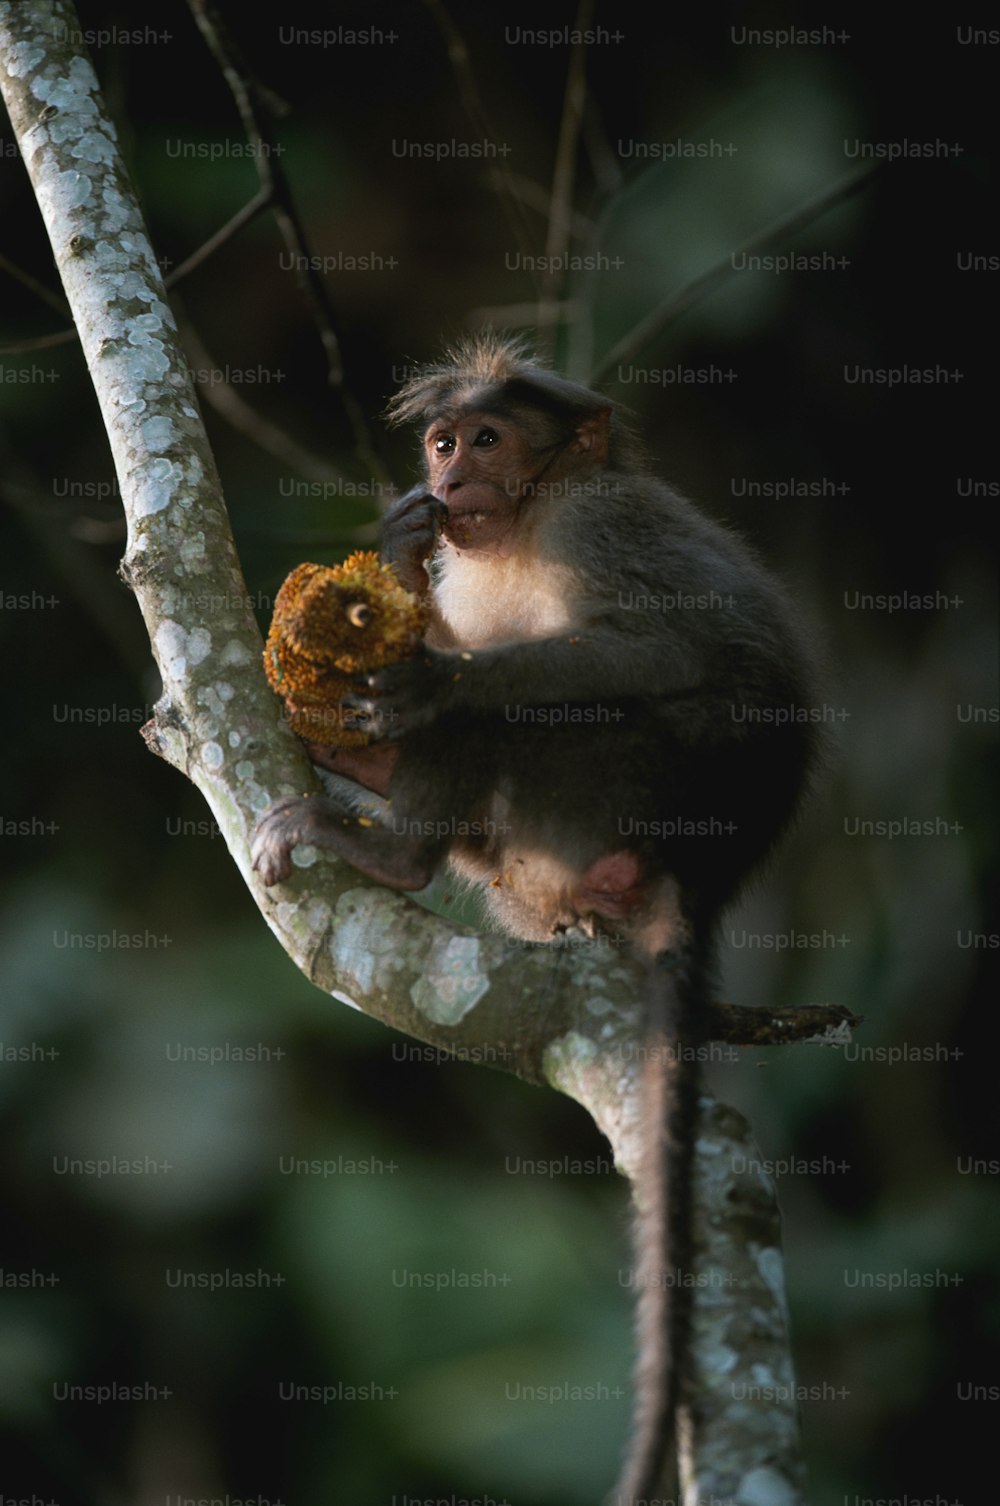 a monkey sitting on a tree branch eating a banana